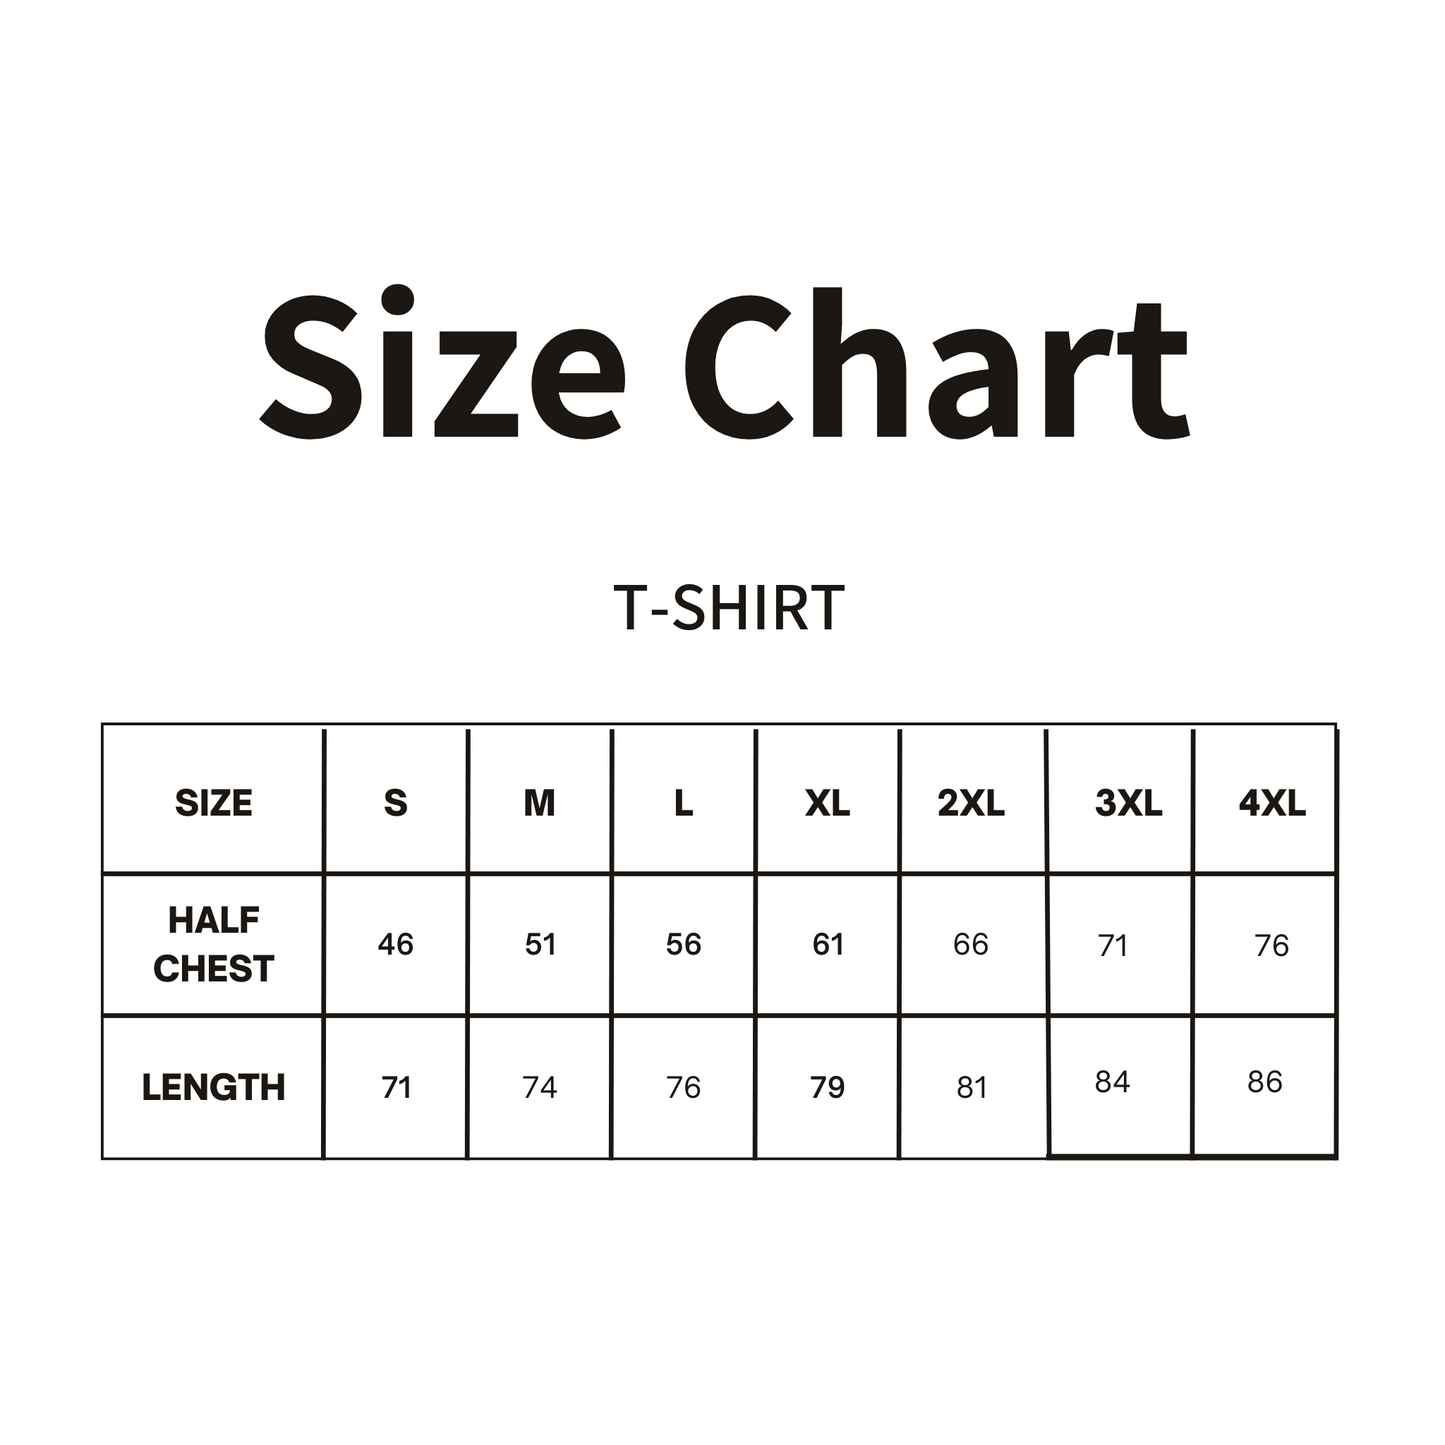 SIZE chart for tshirts with measurements in a table from small to 4xl